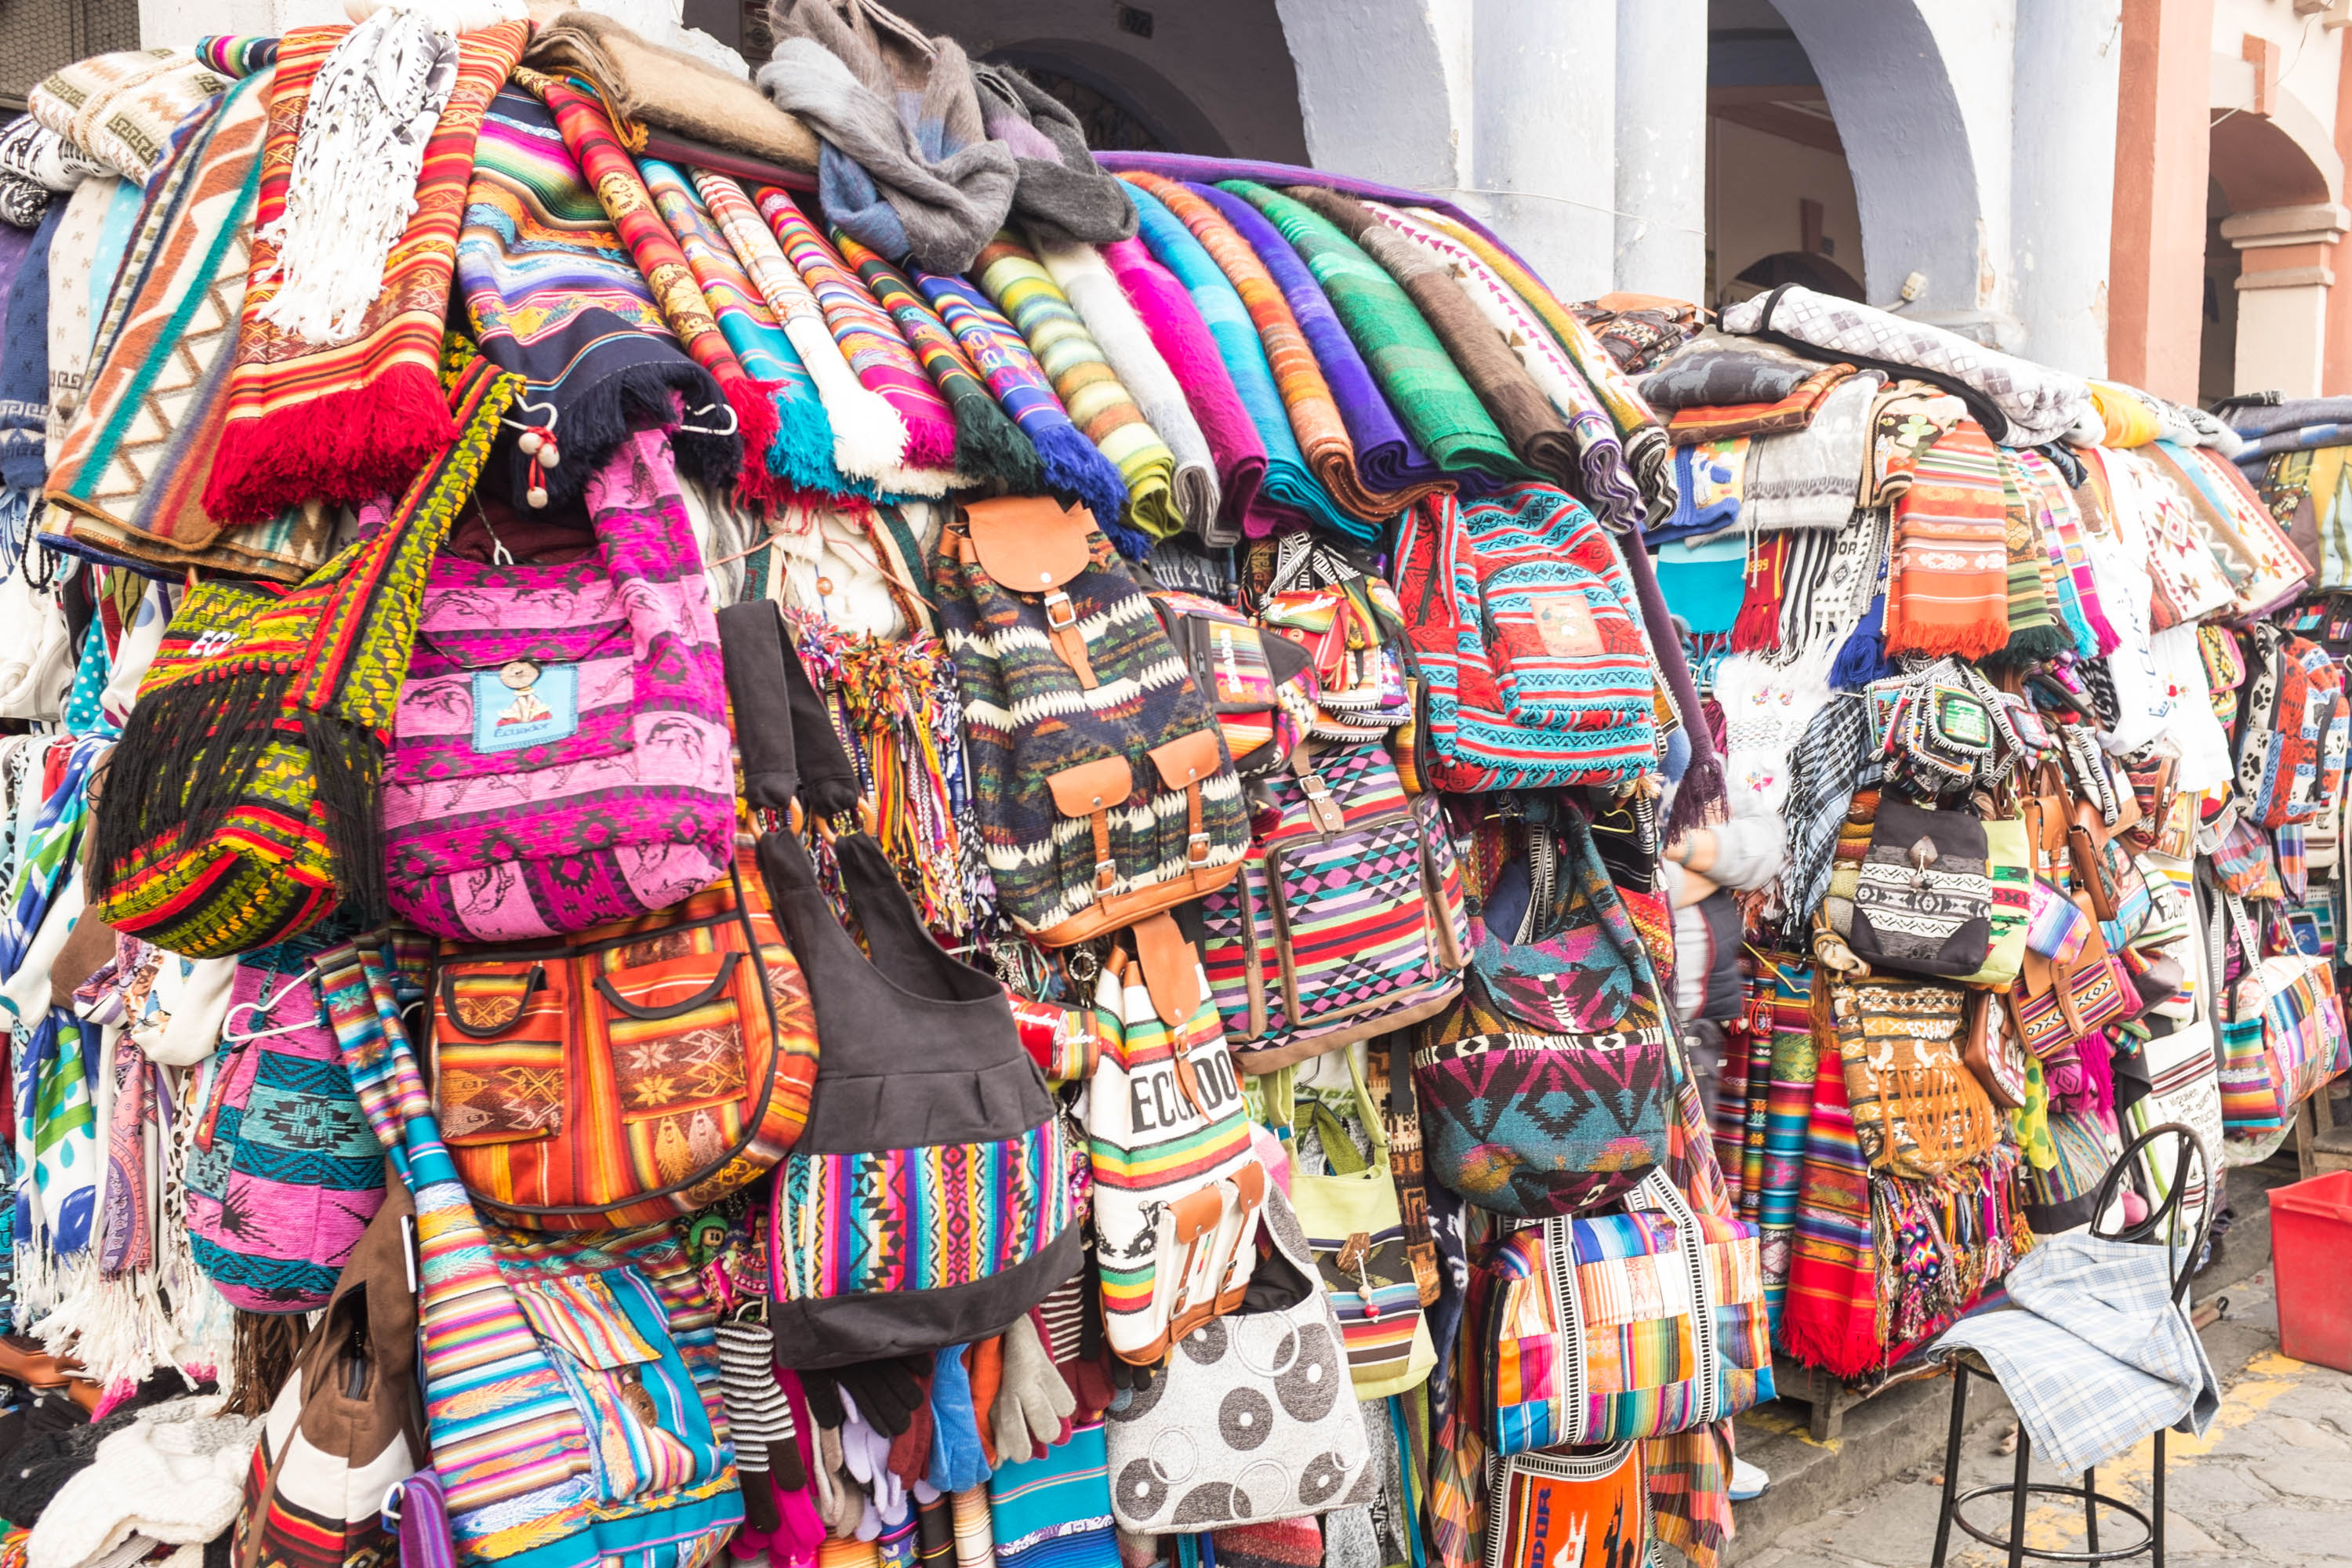 Clutter-free Travel: 5 Tips for Shopping Abroad